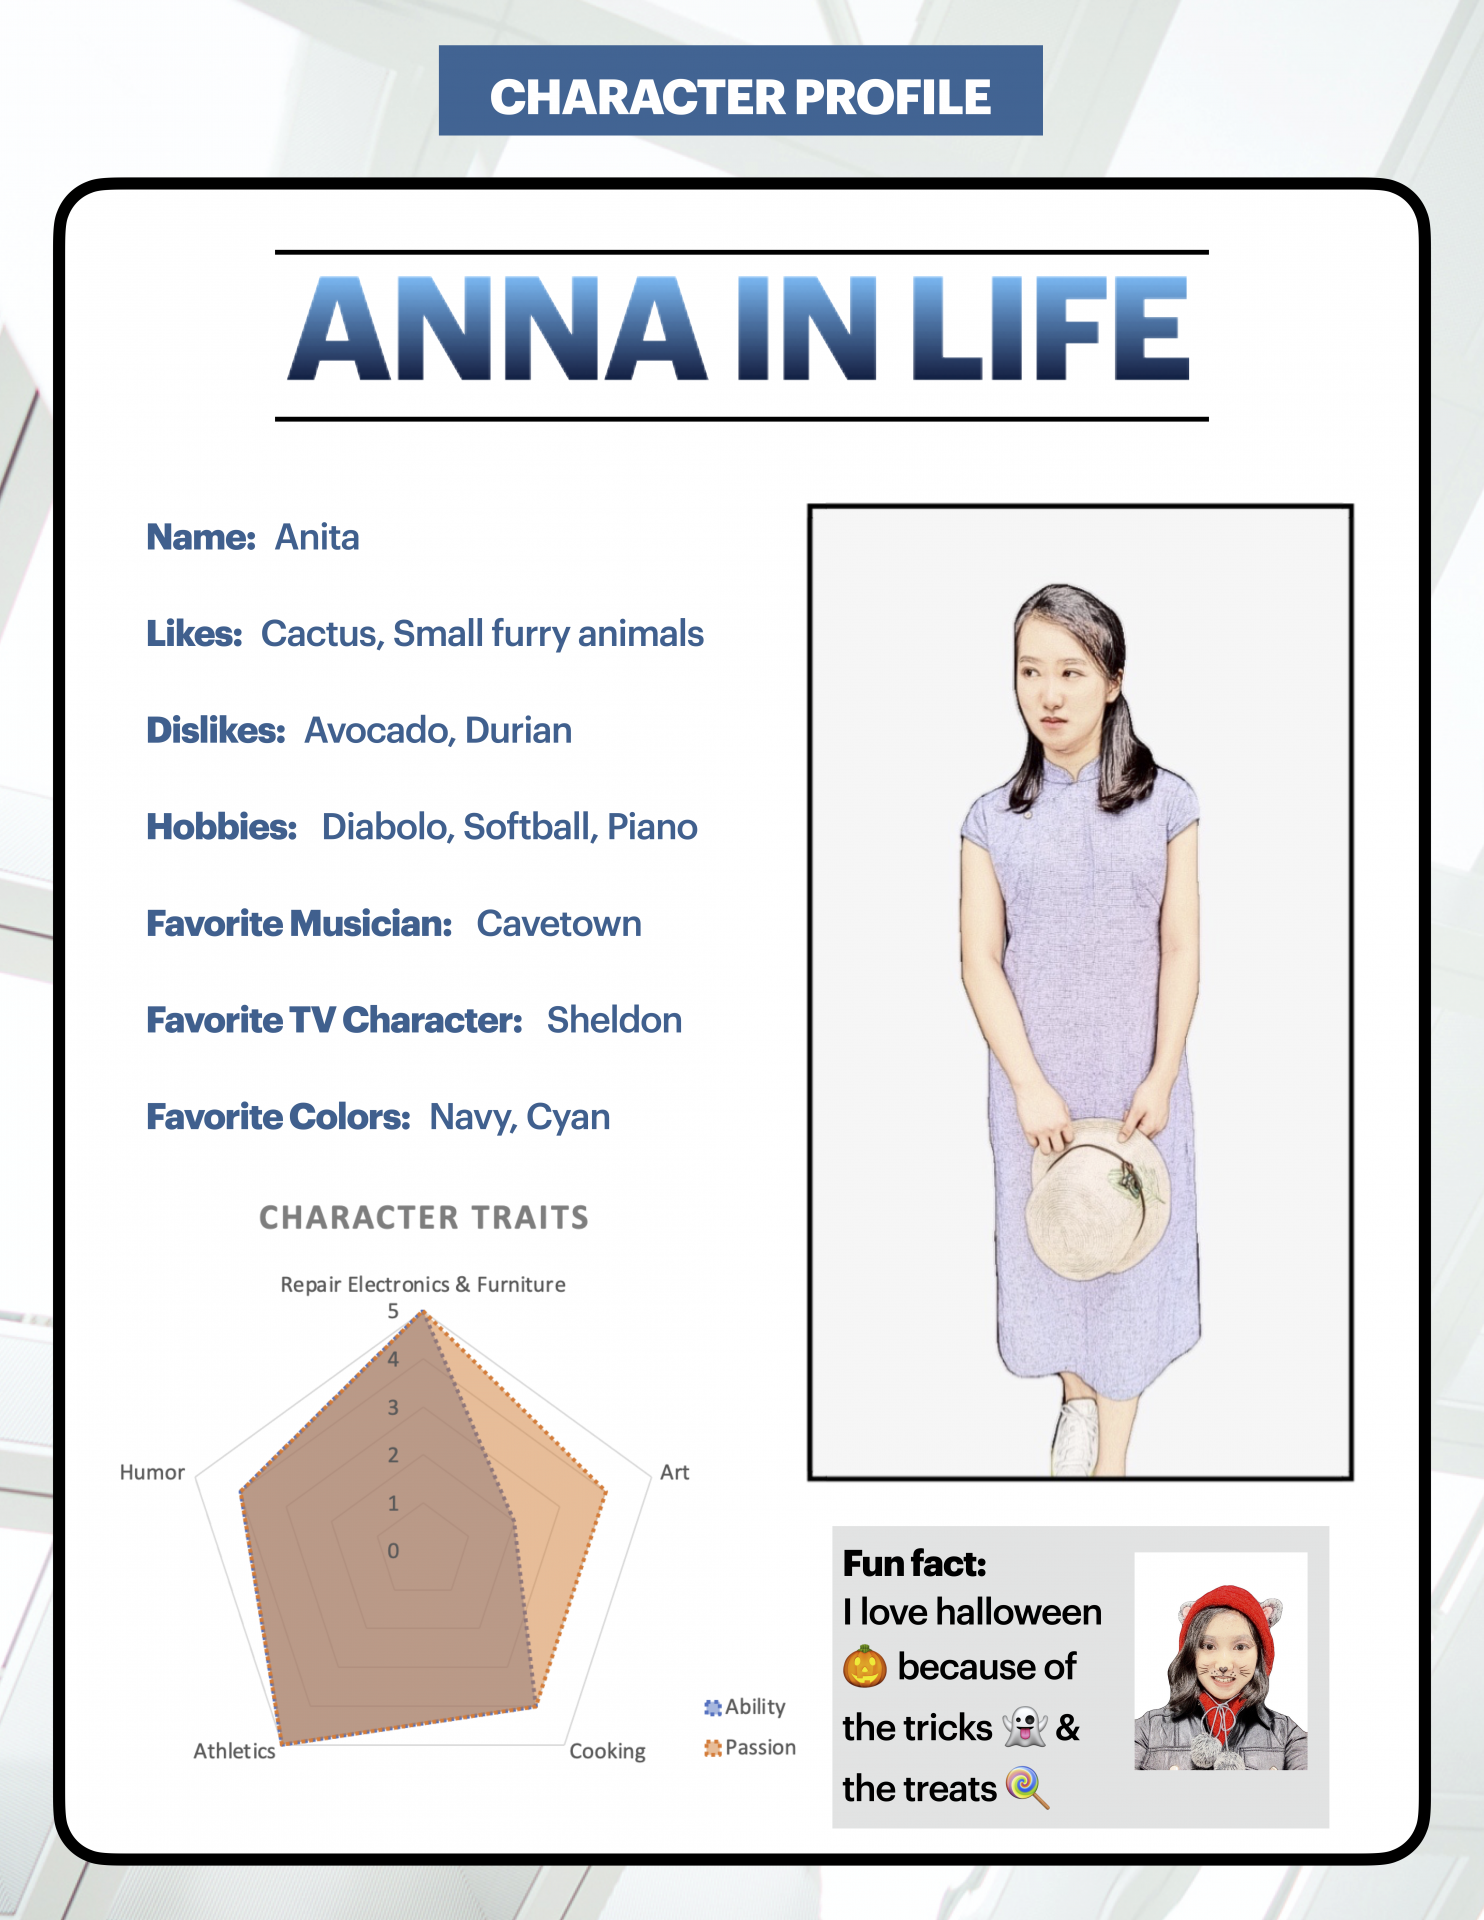 Anna in life - anime character profile